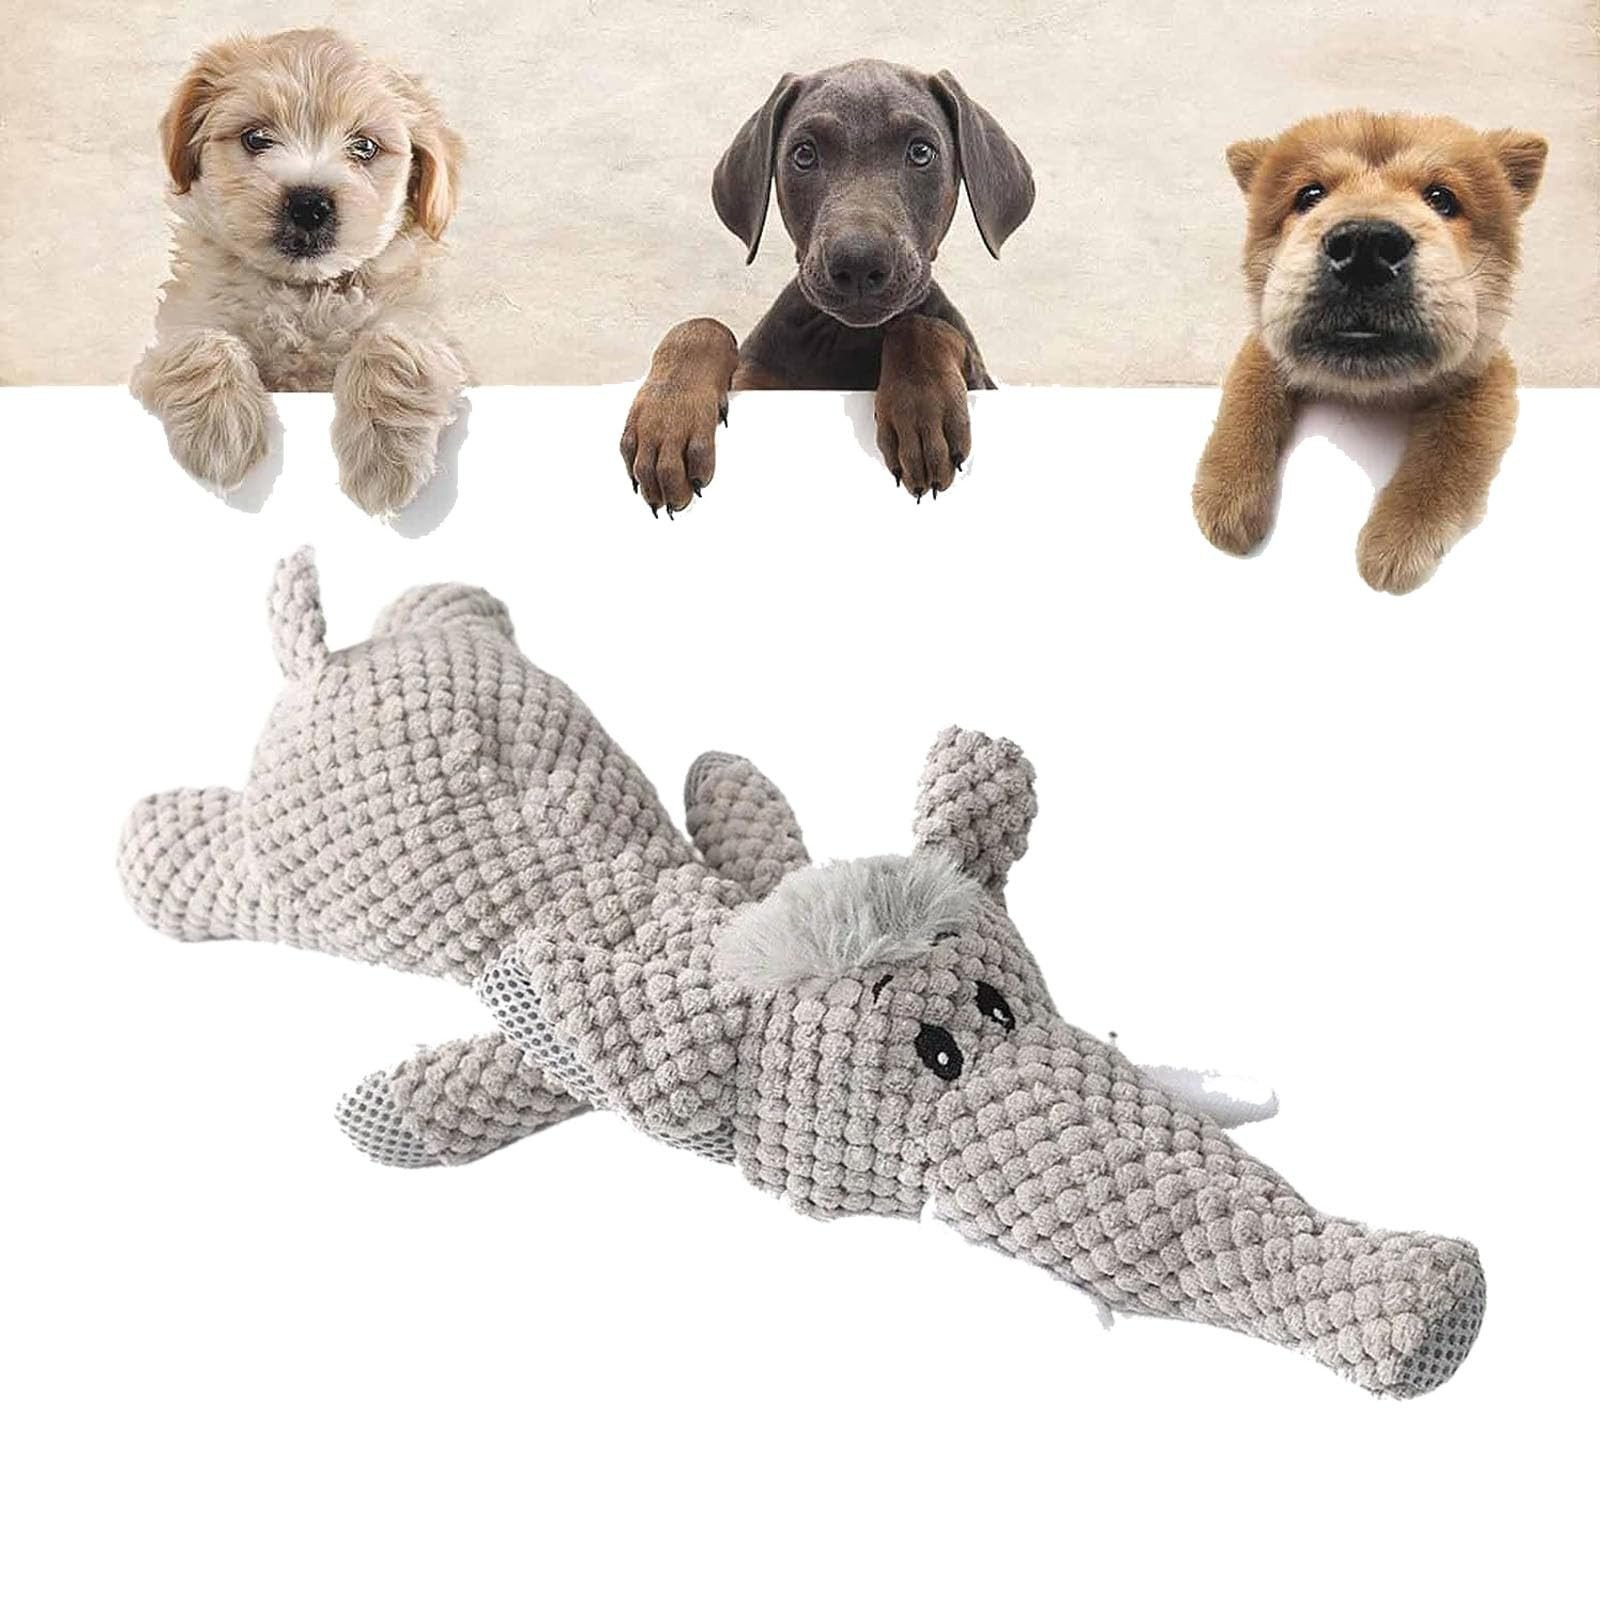 User reviews and testimonials about antarcking dog toys